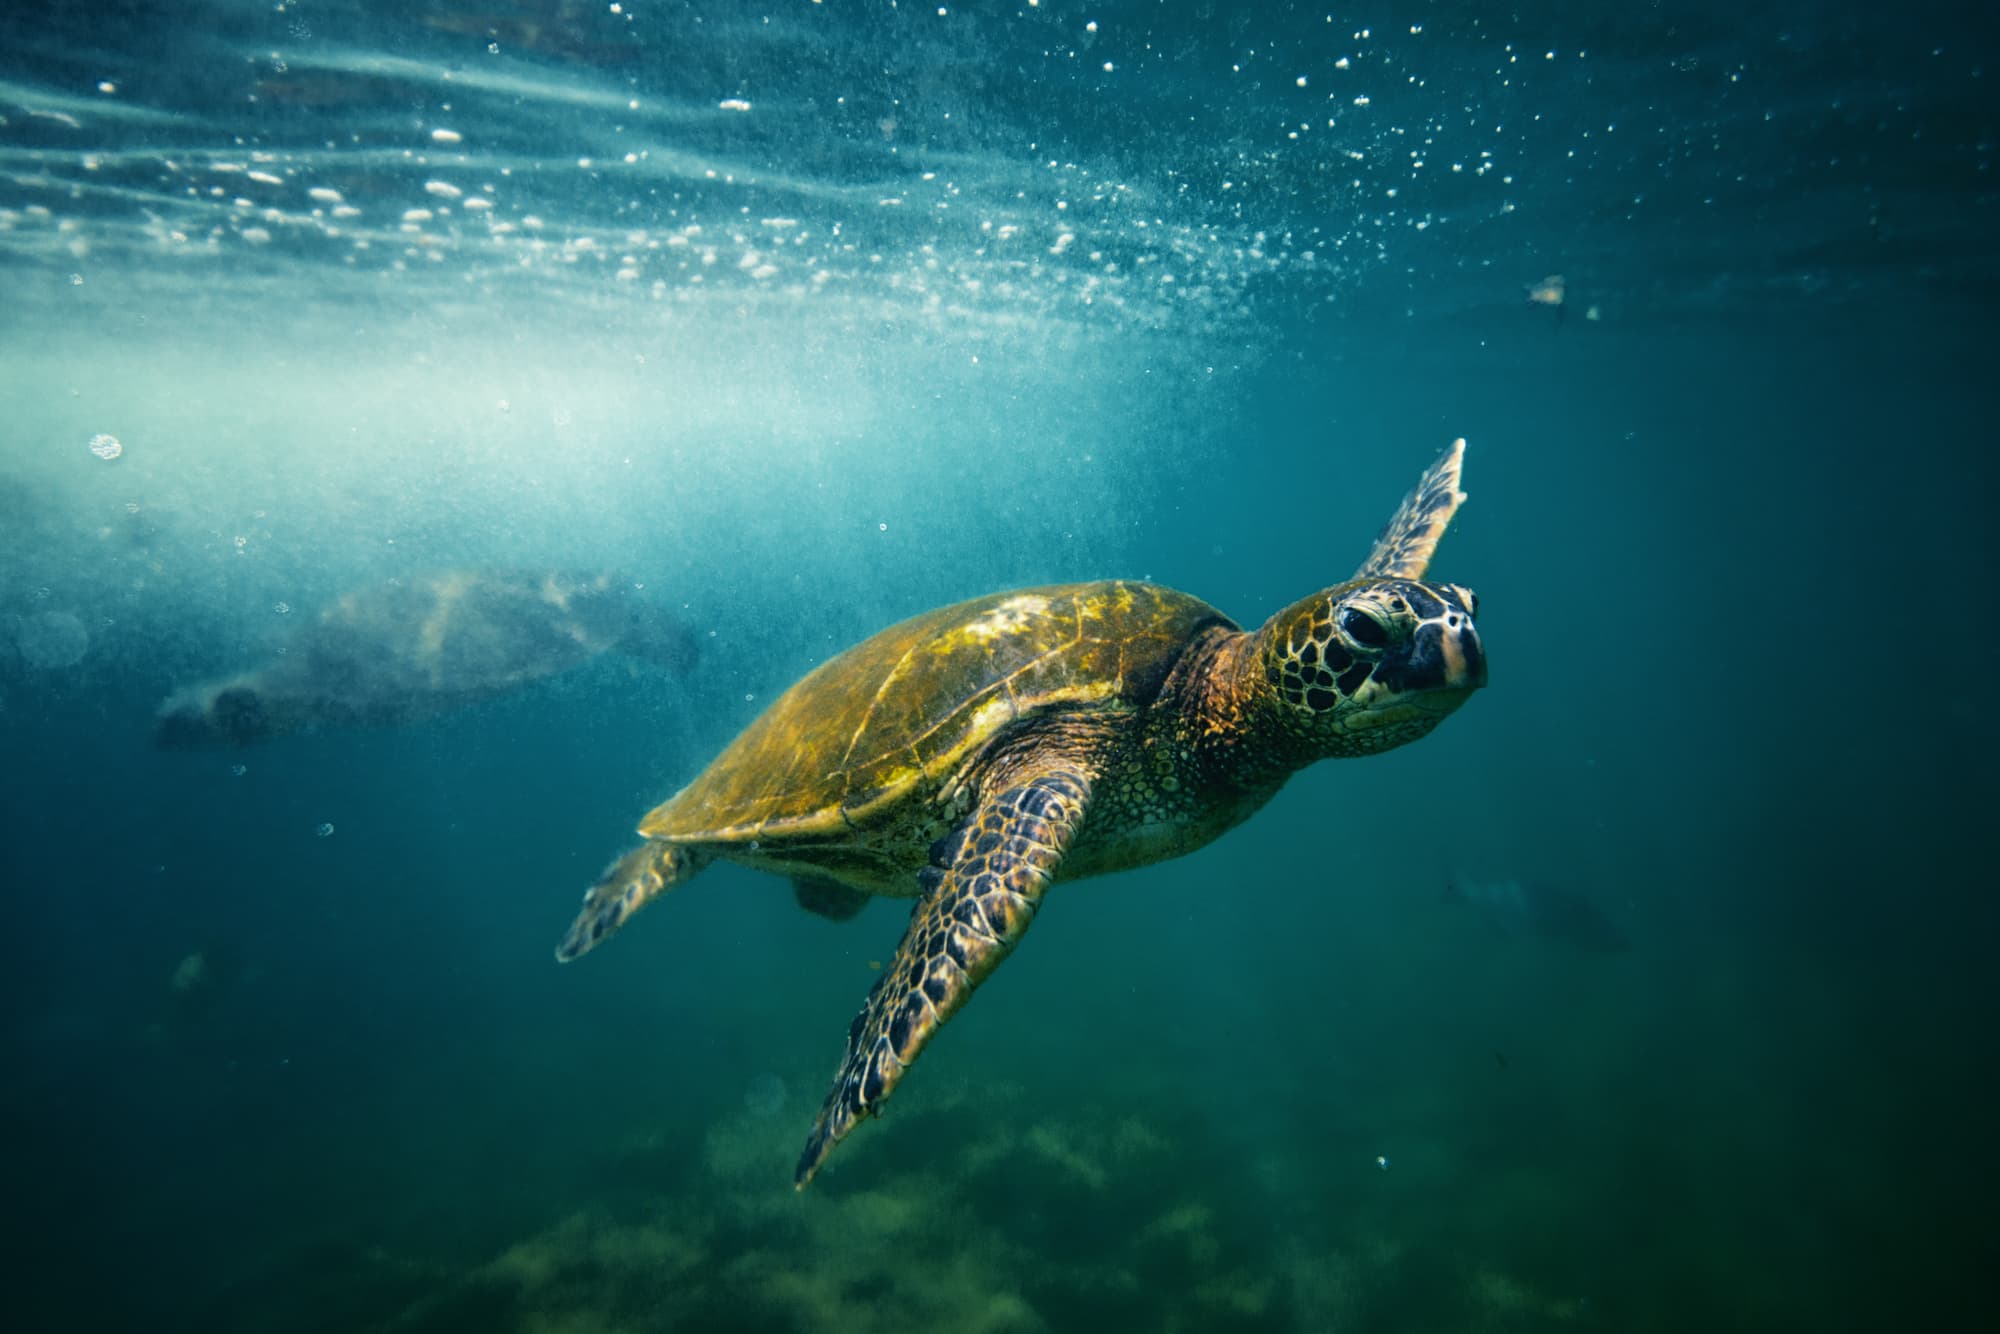 The 8 Best Spots to Find Sea Turtles in Hawaiʻi (All Islands)